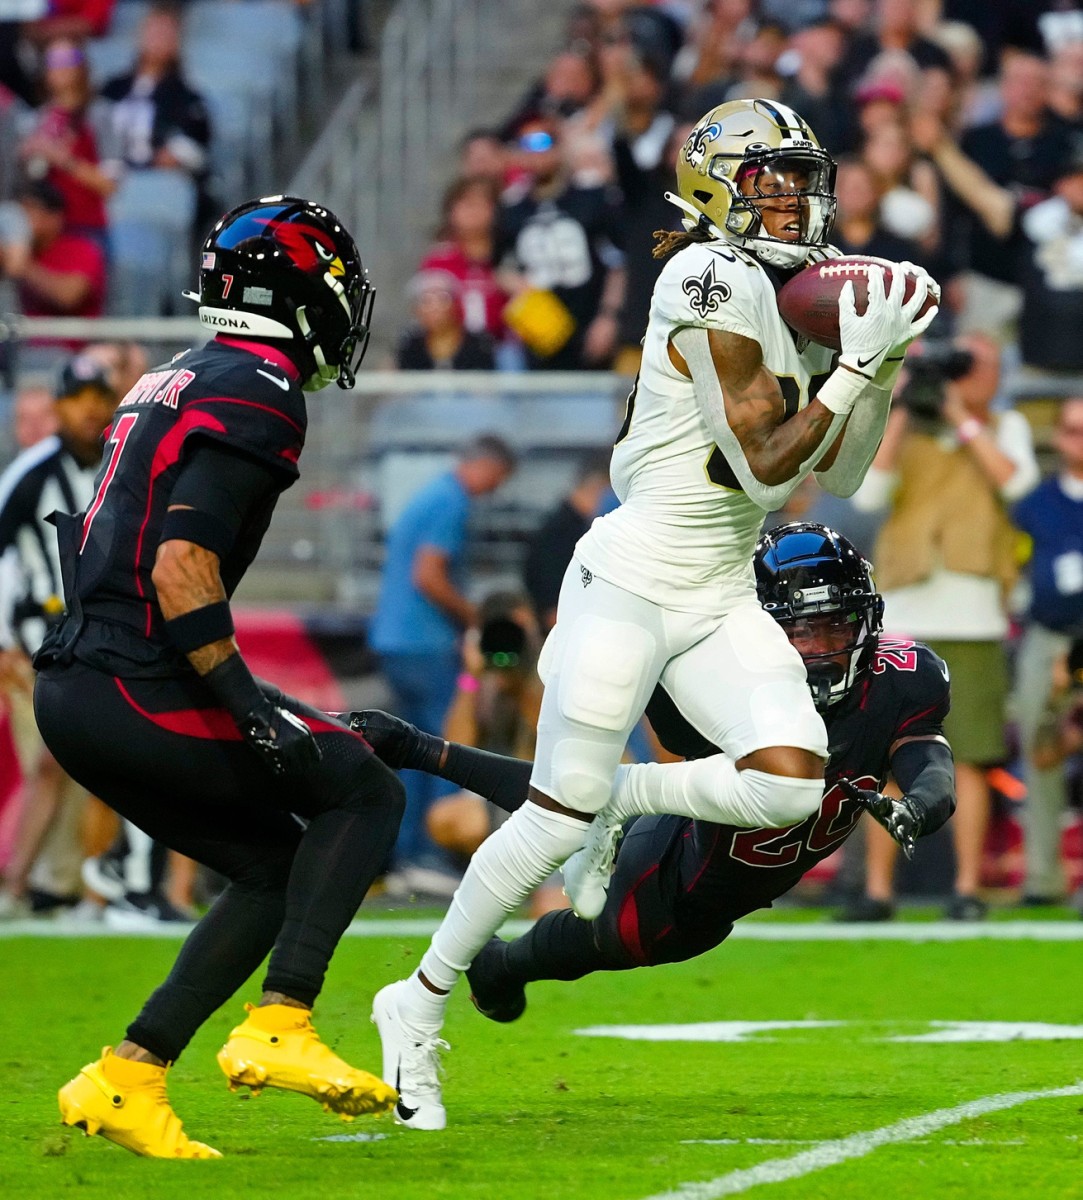 Saints Rashid Shaheed (89) makes a reception and scores a touchdown against the Cardinals Marco Wilson (20). © Patrick Breen/The Republic / USA TODAY NETWORK